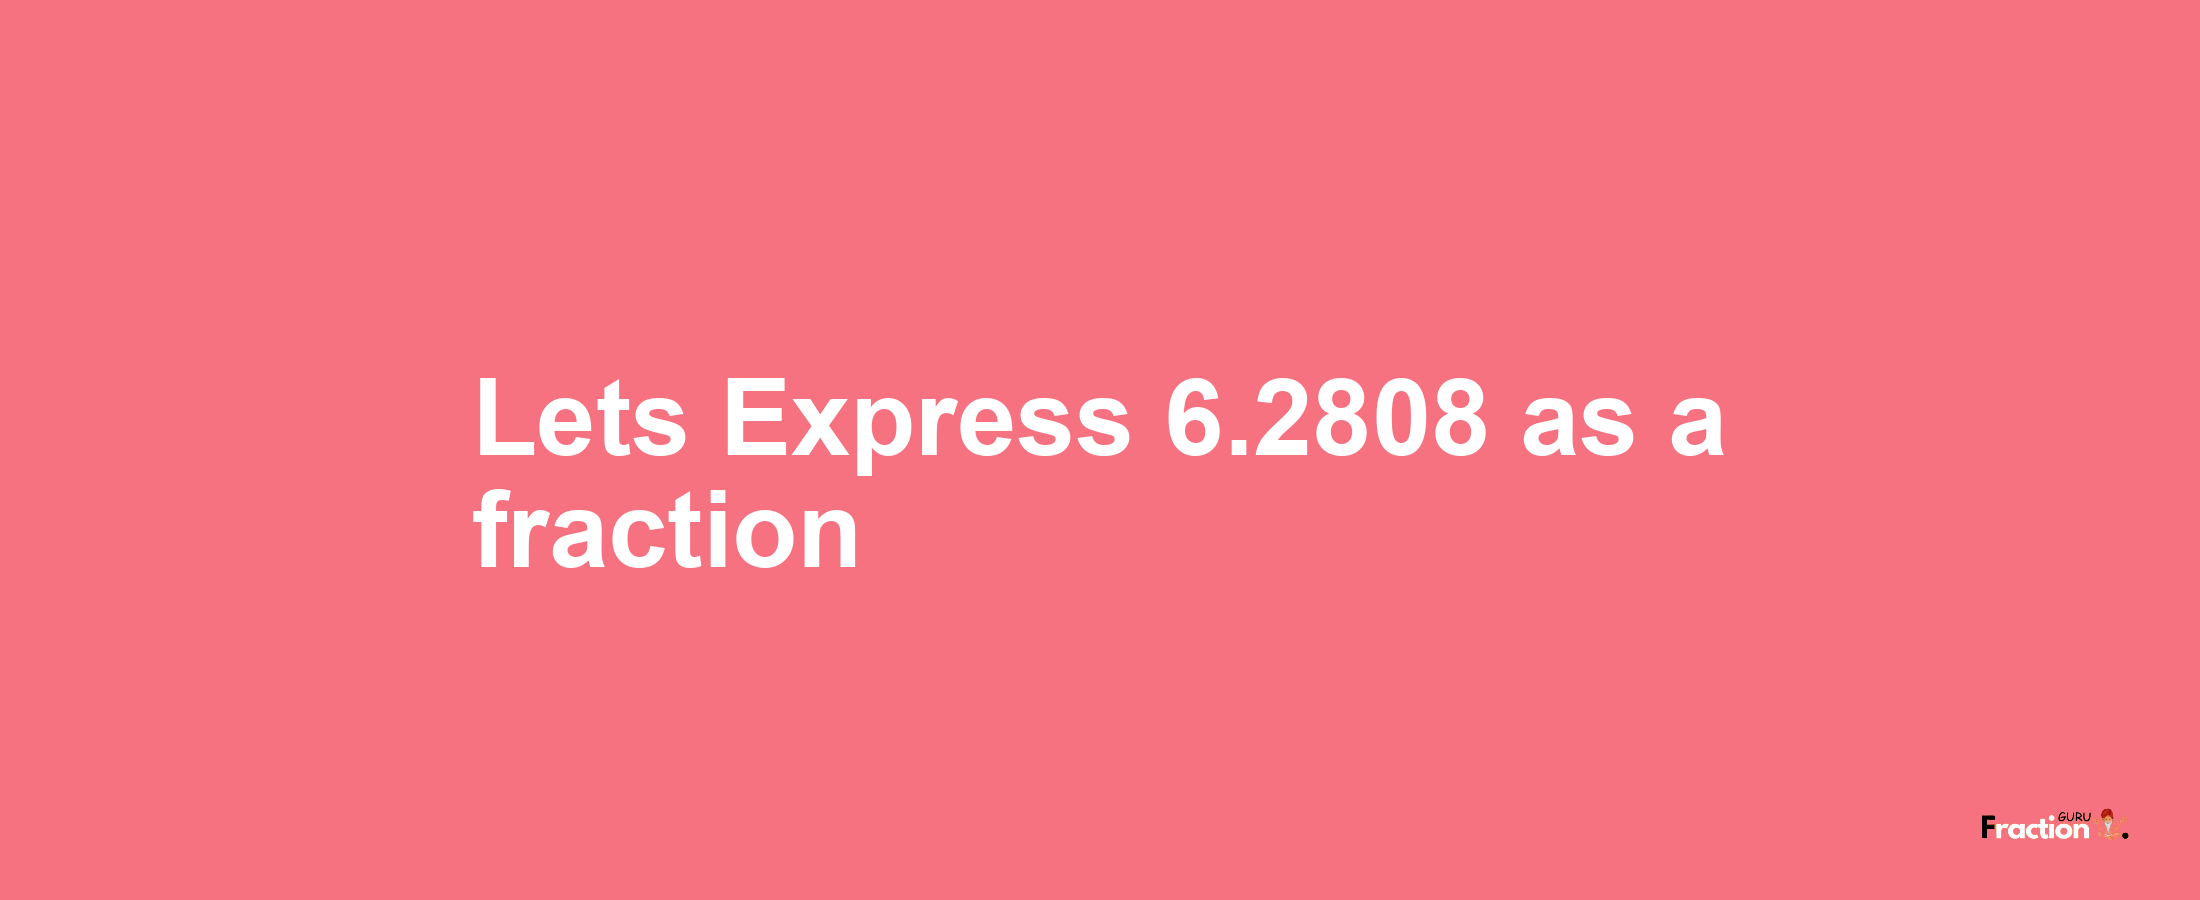 Lets Express 6.2808 as afraction